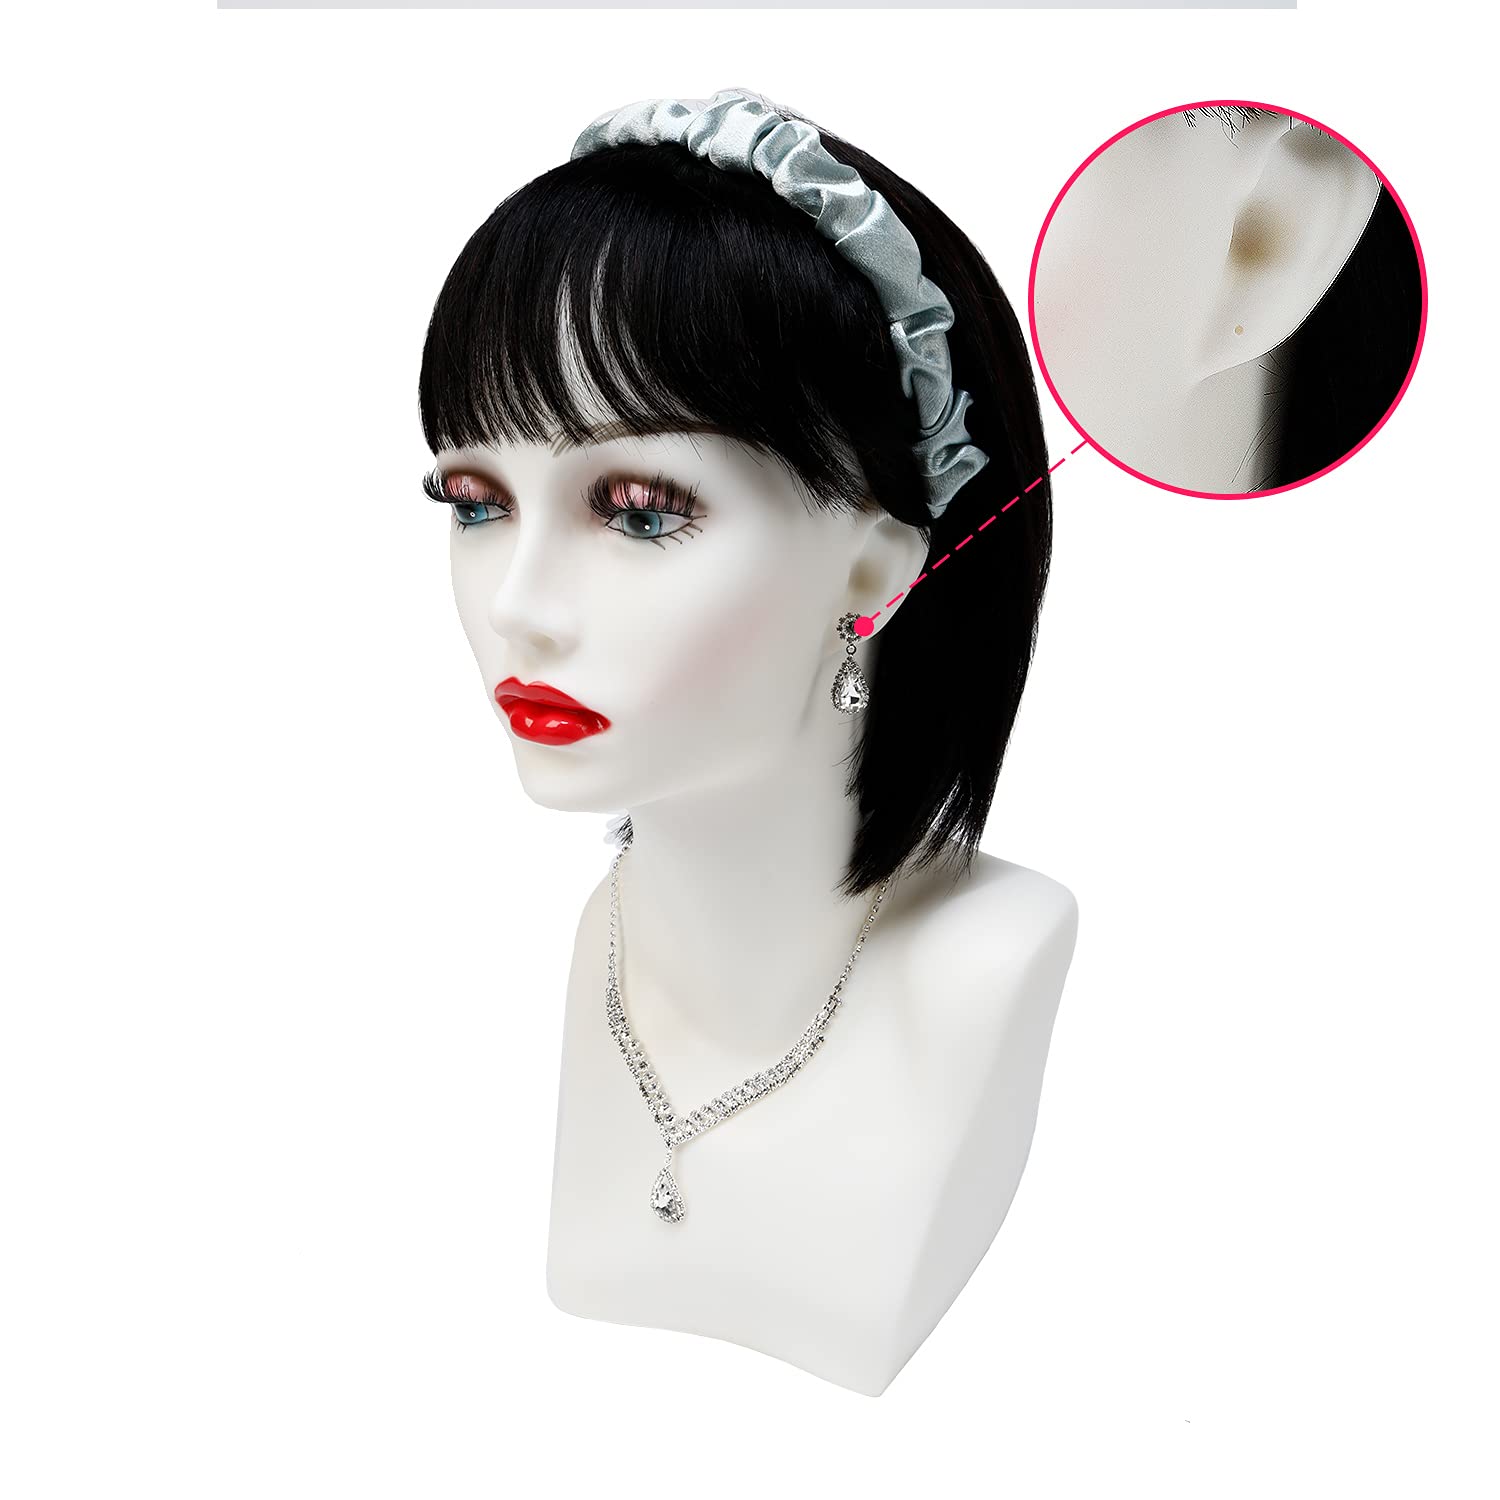 STUDIO LIMITED 16'' White Female PVC Mannequin Head with Makeups for cosmetology salon practice tool realistic and durable Find Your New Look Today!